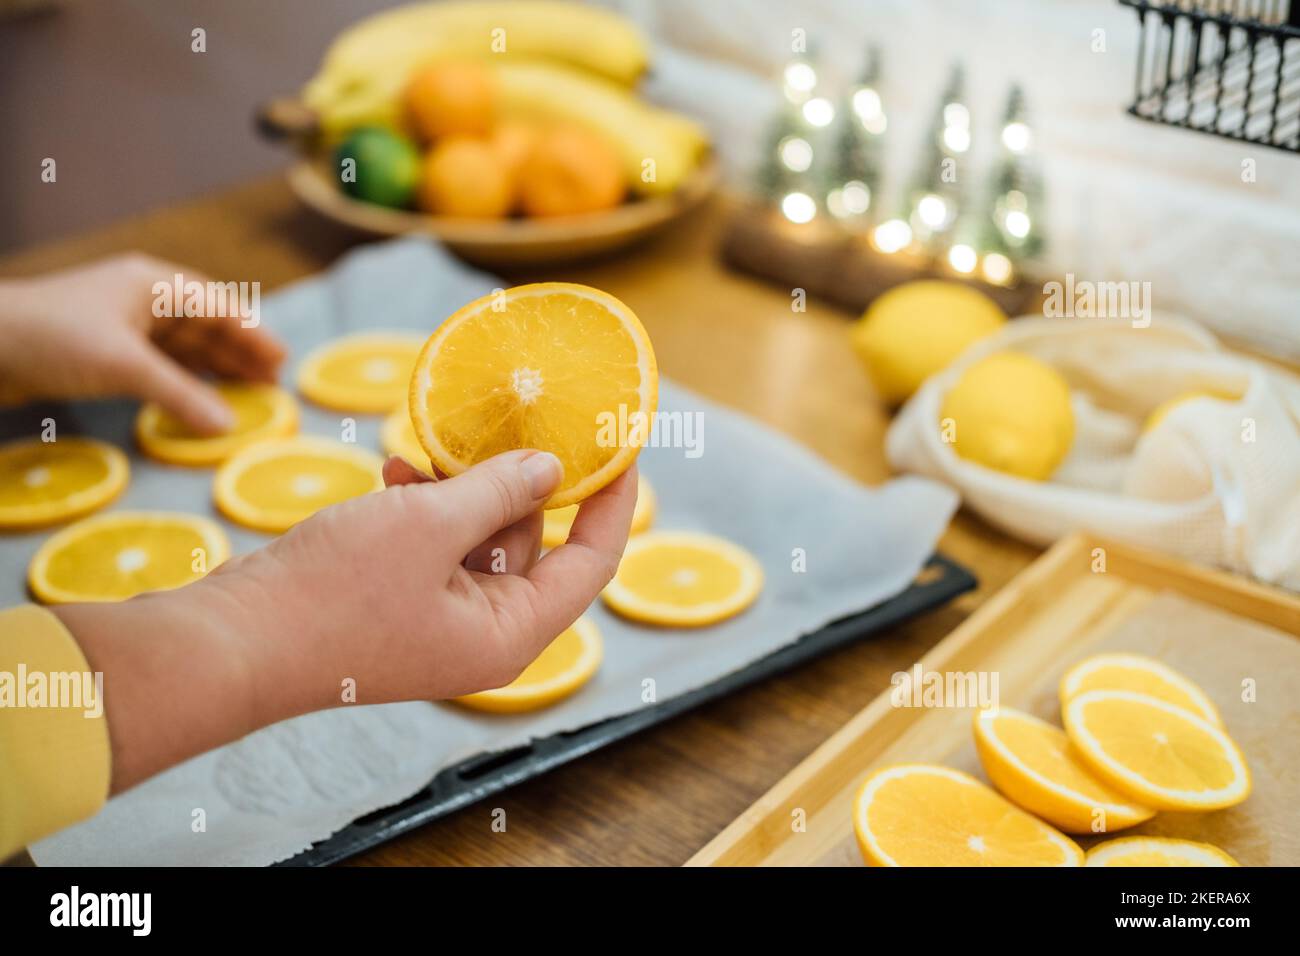 How to Dry Orange Slices for Eco friendly zero waste Holiday Decor. Close up Process of Drying Orange Slices in Oven. Woman cutting slices of orange Stock Photo